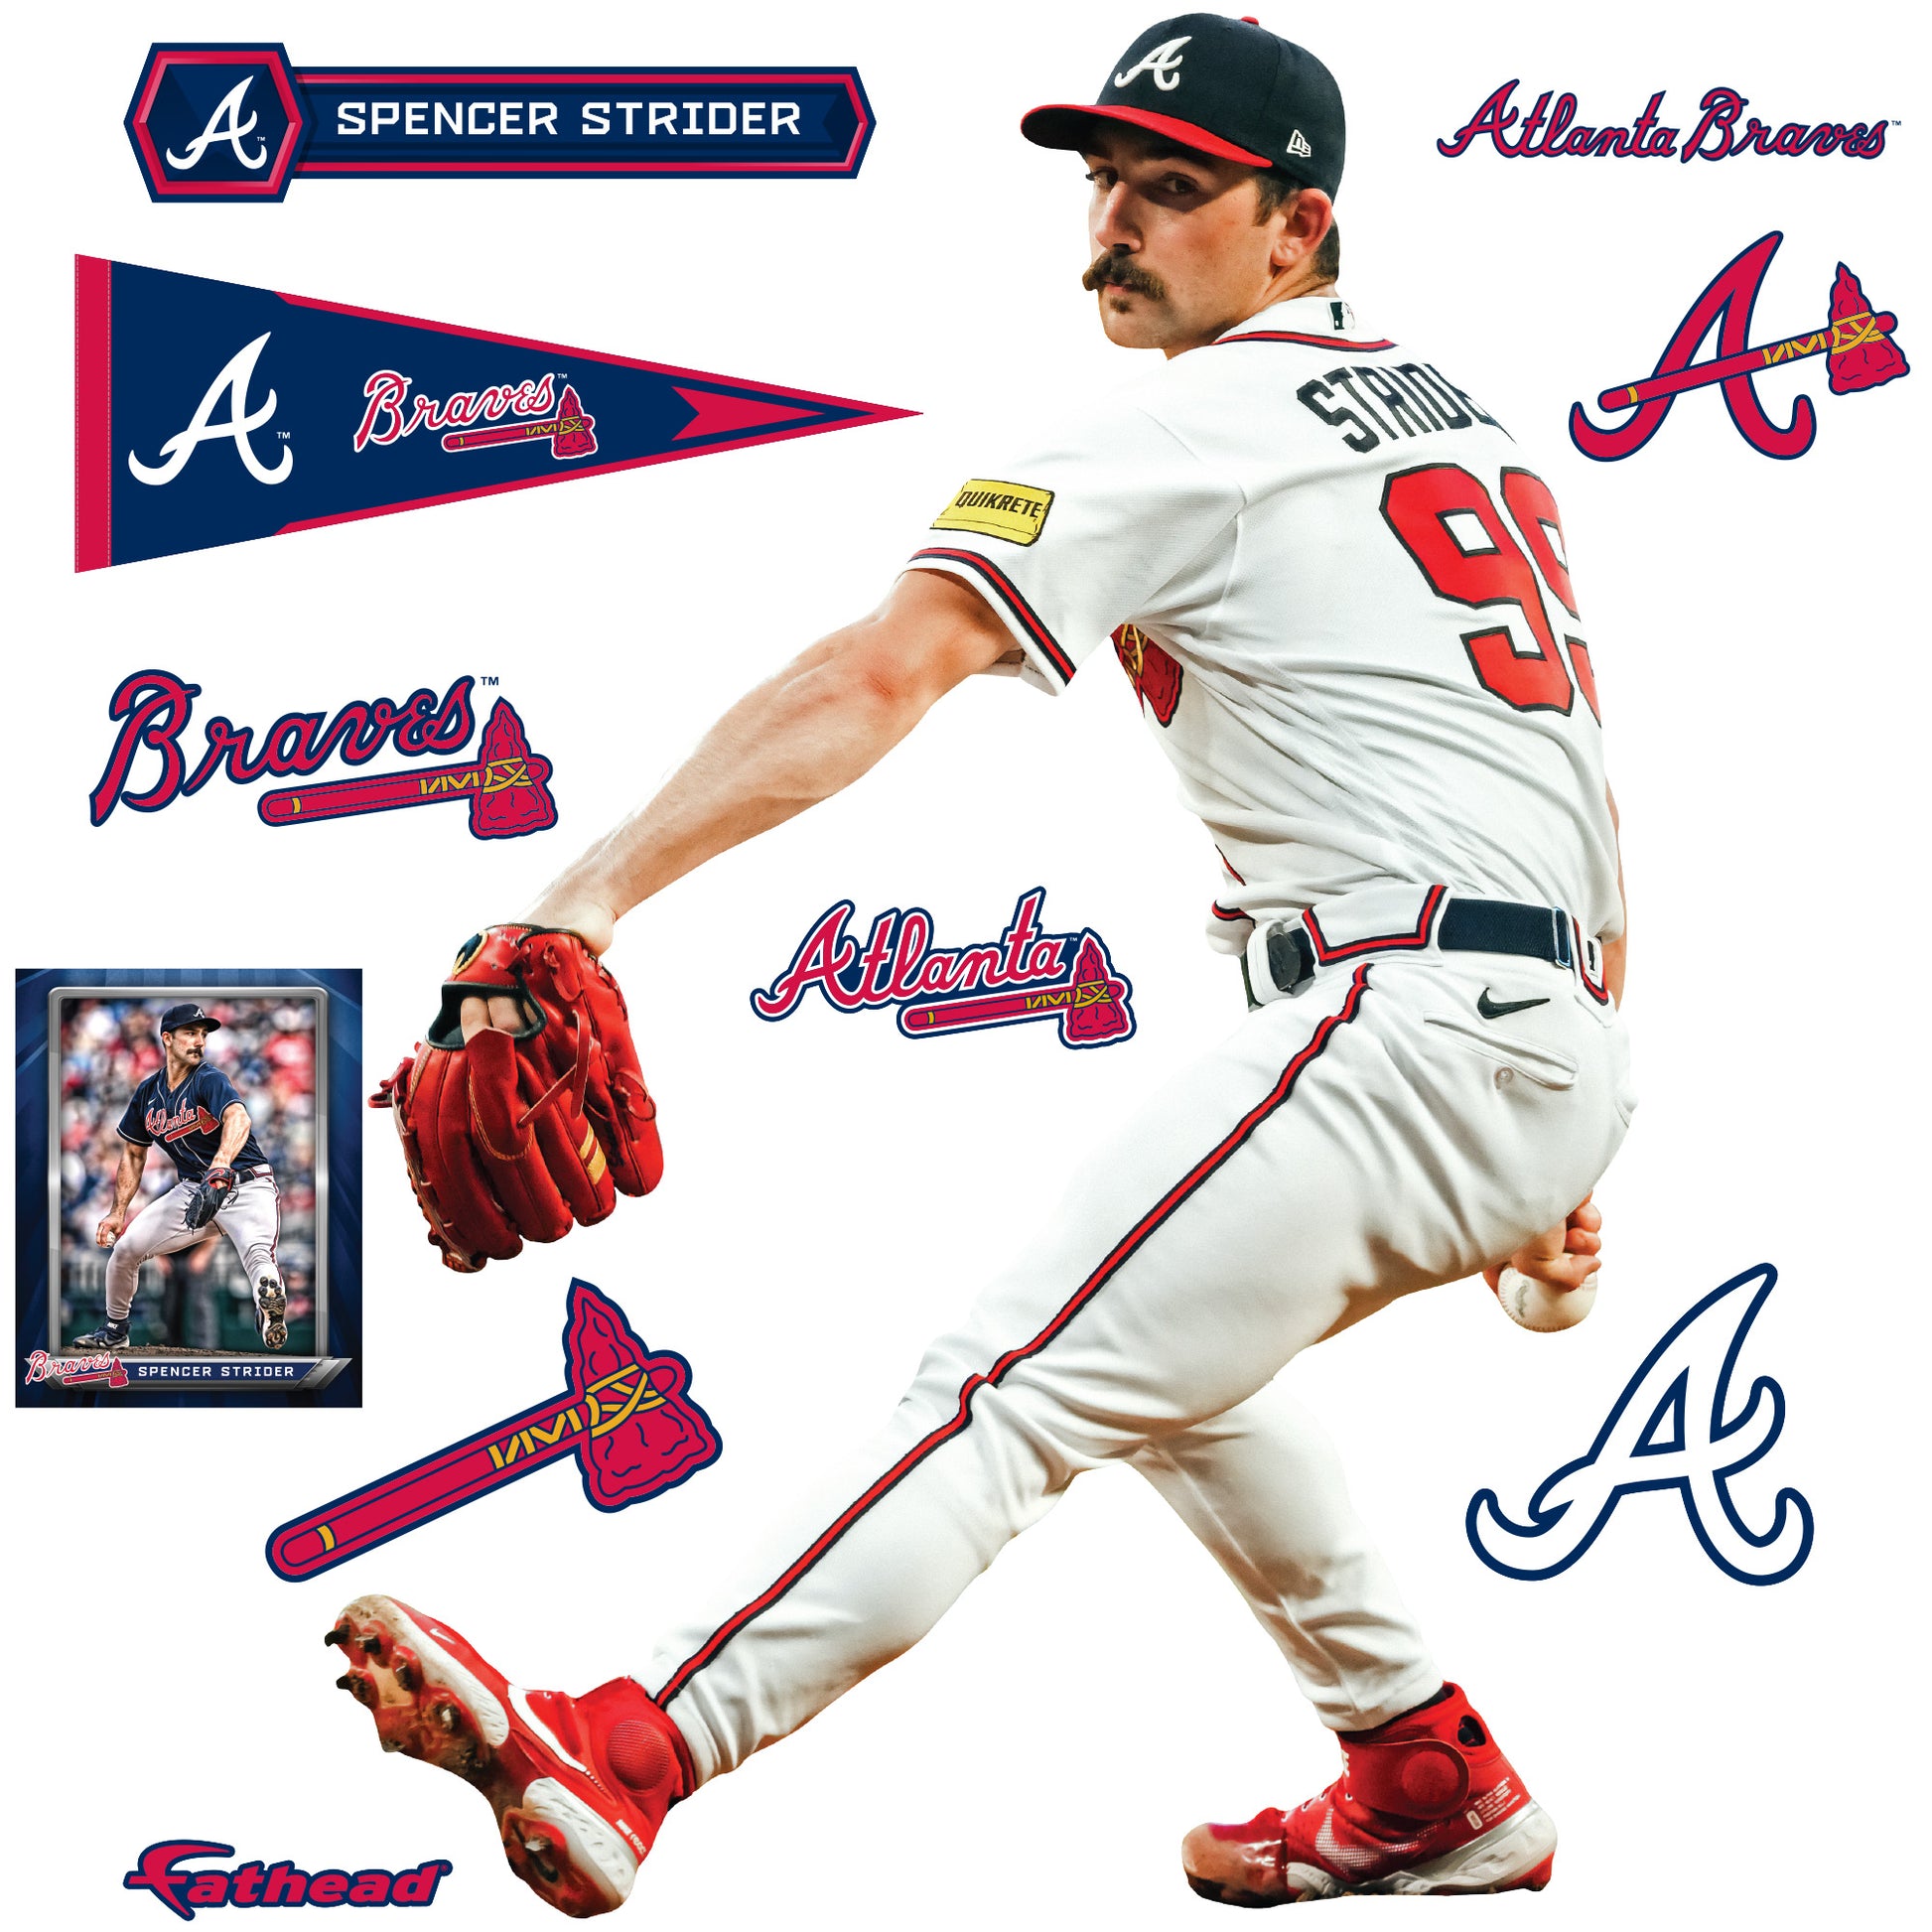 Braves: Spencer Strider is a different kind of beast